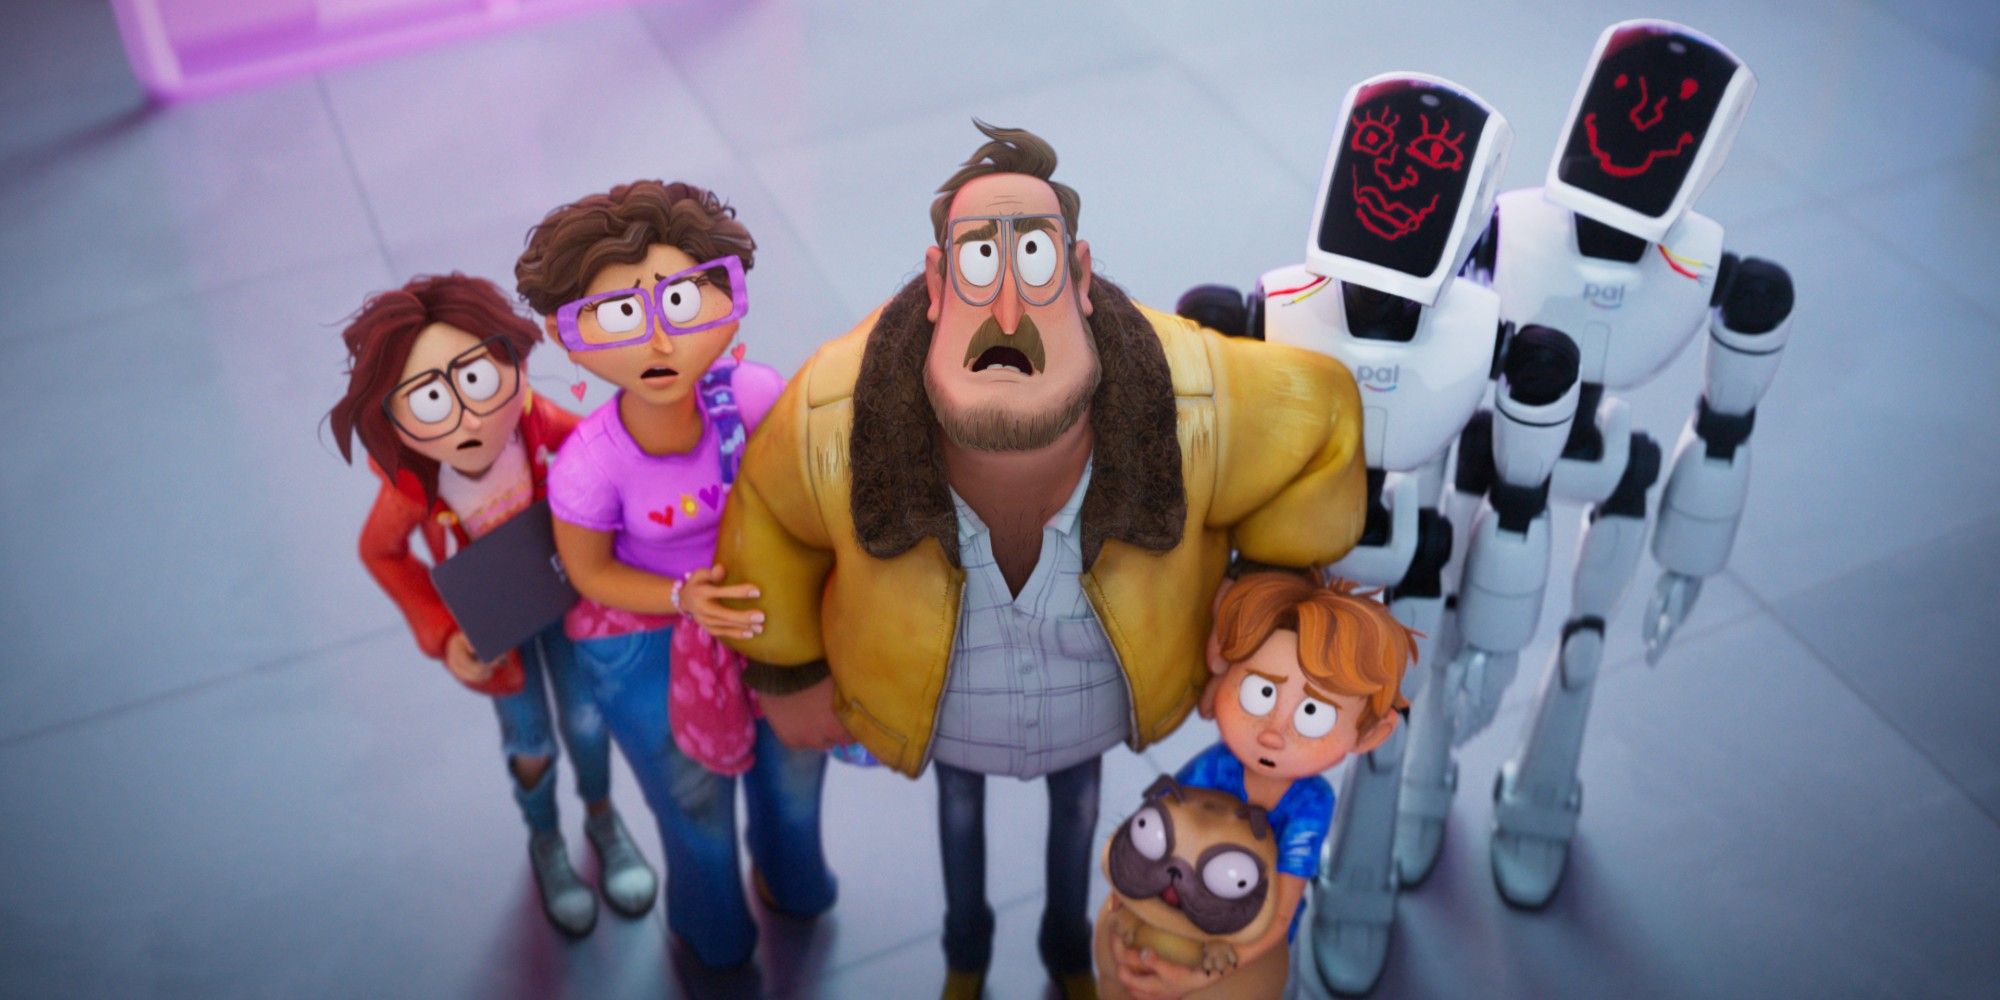 Voices of Abbi Jacobson, Maya Rudolph, Danny McBride, Mike Rianda, Fred Armisen and Beck Bennett in The Mitchells vs the Machines